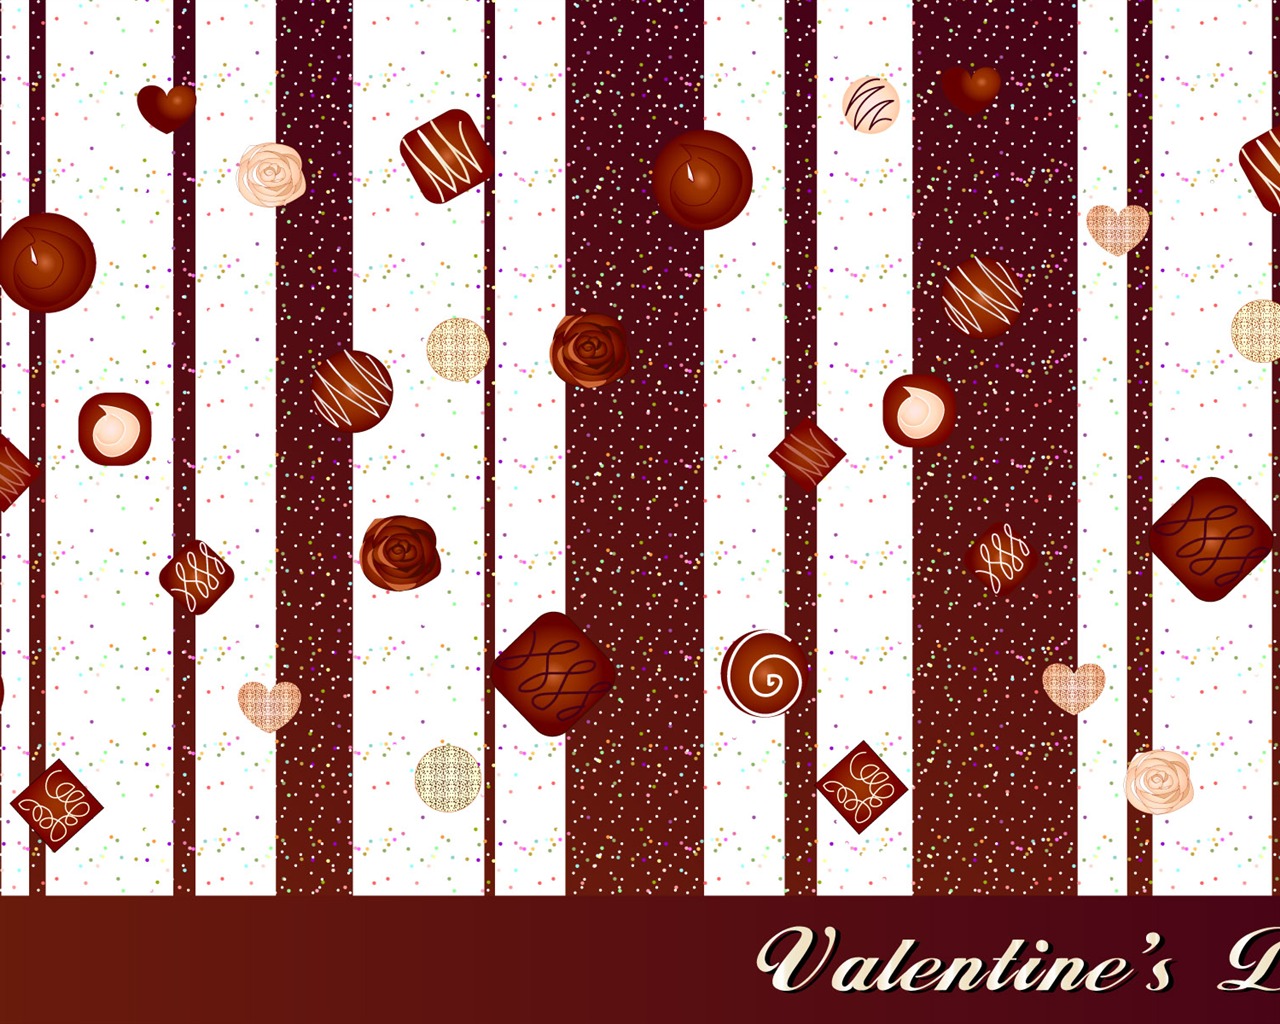 Valentine's Day Theme Wallpapers (1) #18 - 1280x1024